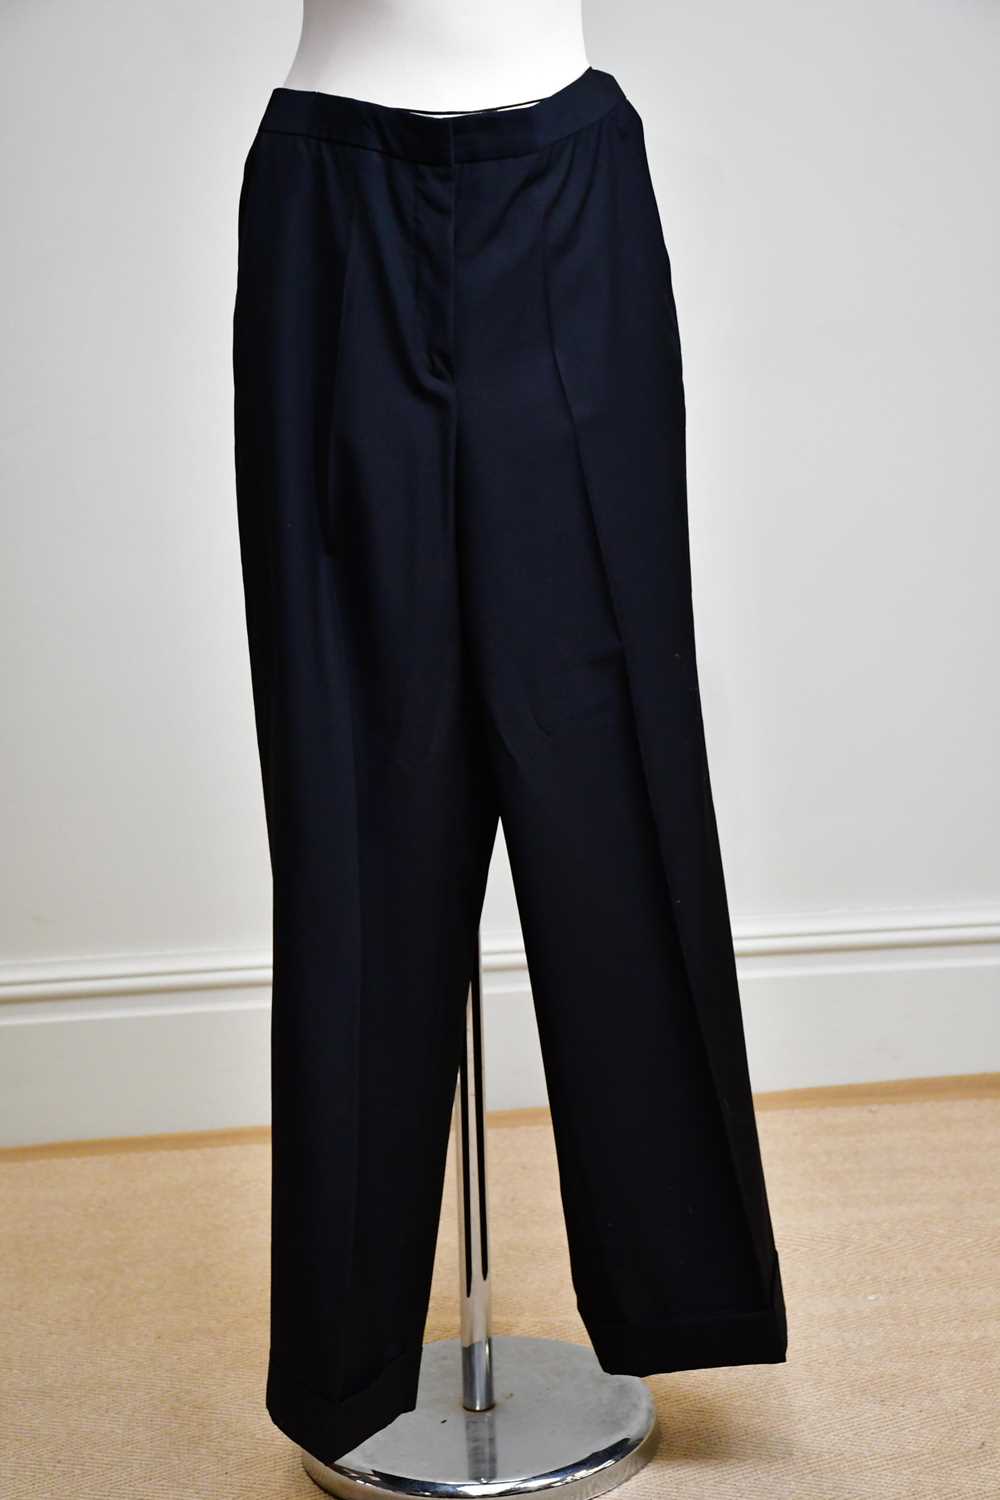 ALEXANDER MCQUEEN; a pair of 100% wool black wide leg lady's trousers, with turn up bottom, side